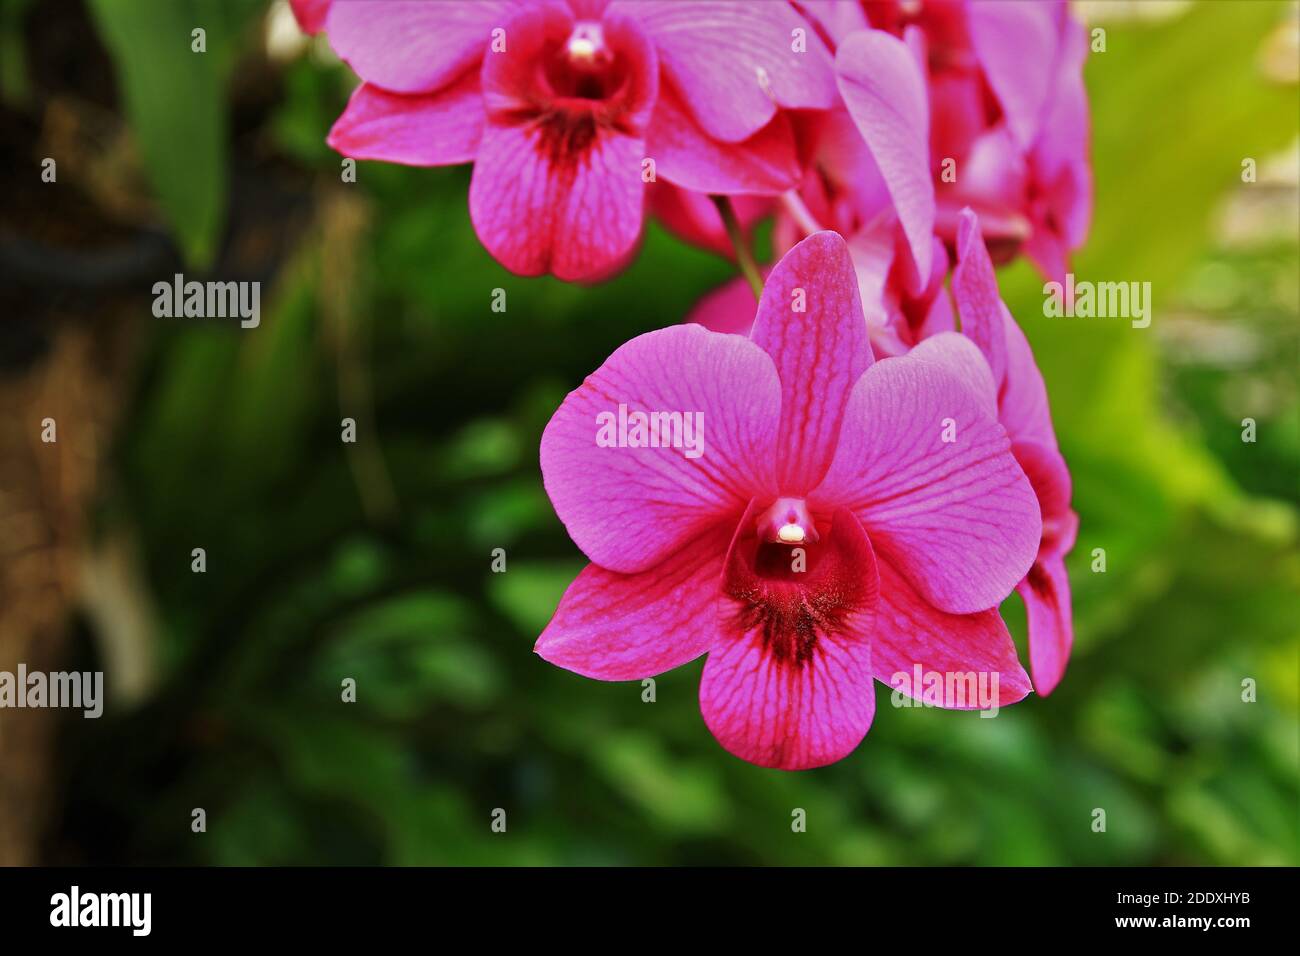 Pink orchid flowers in garden. stock photo Stock Photo